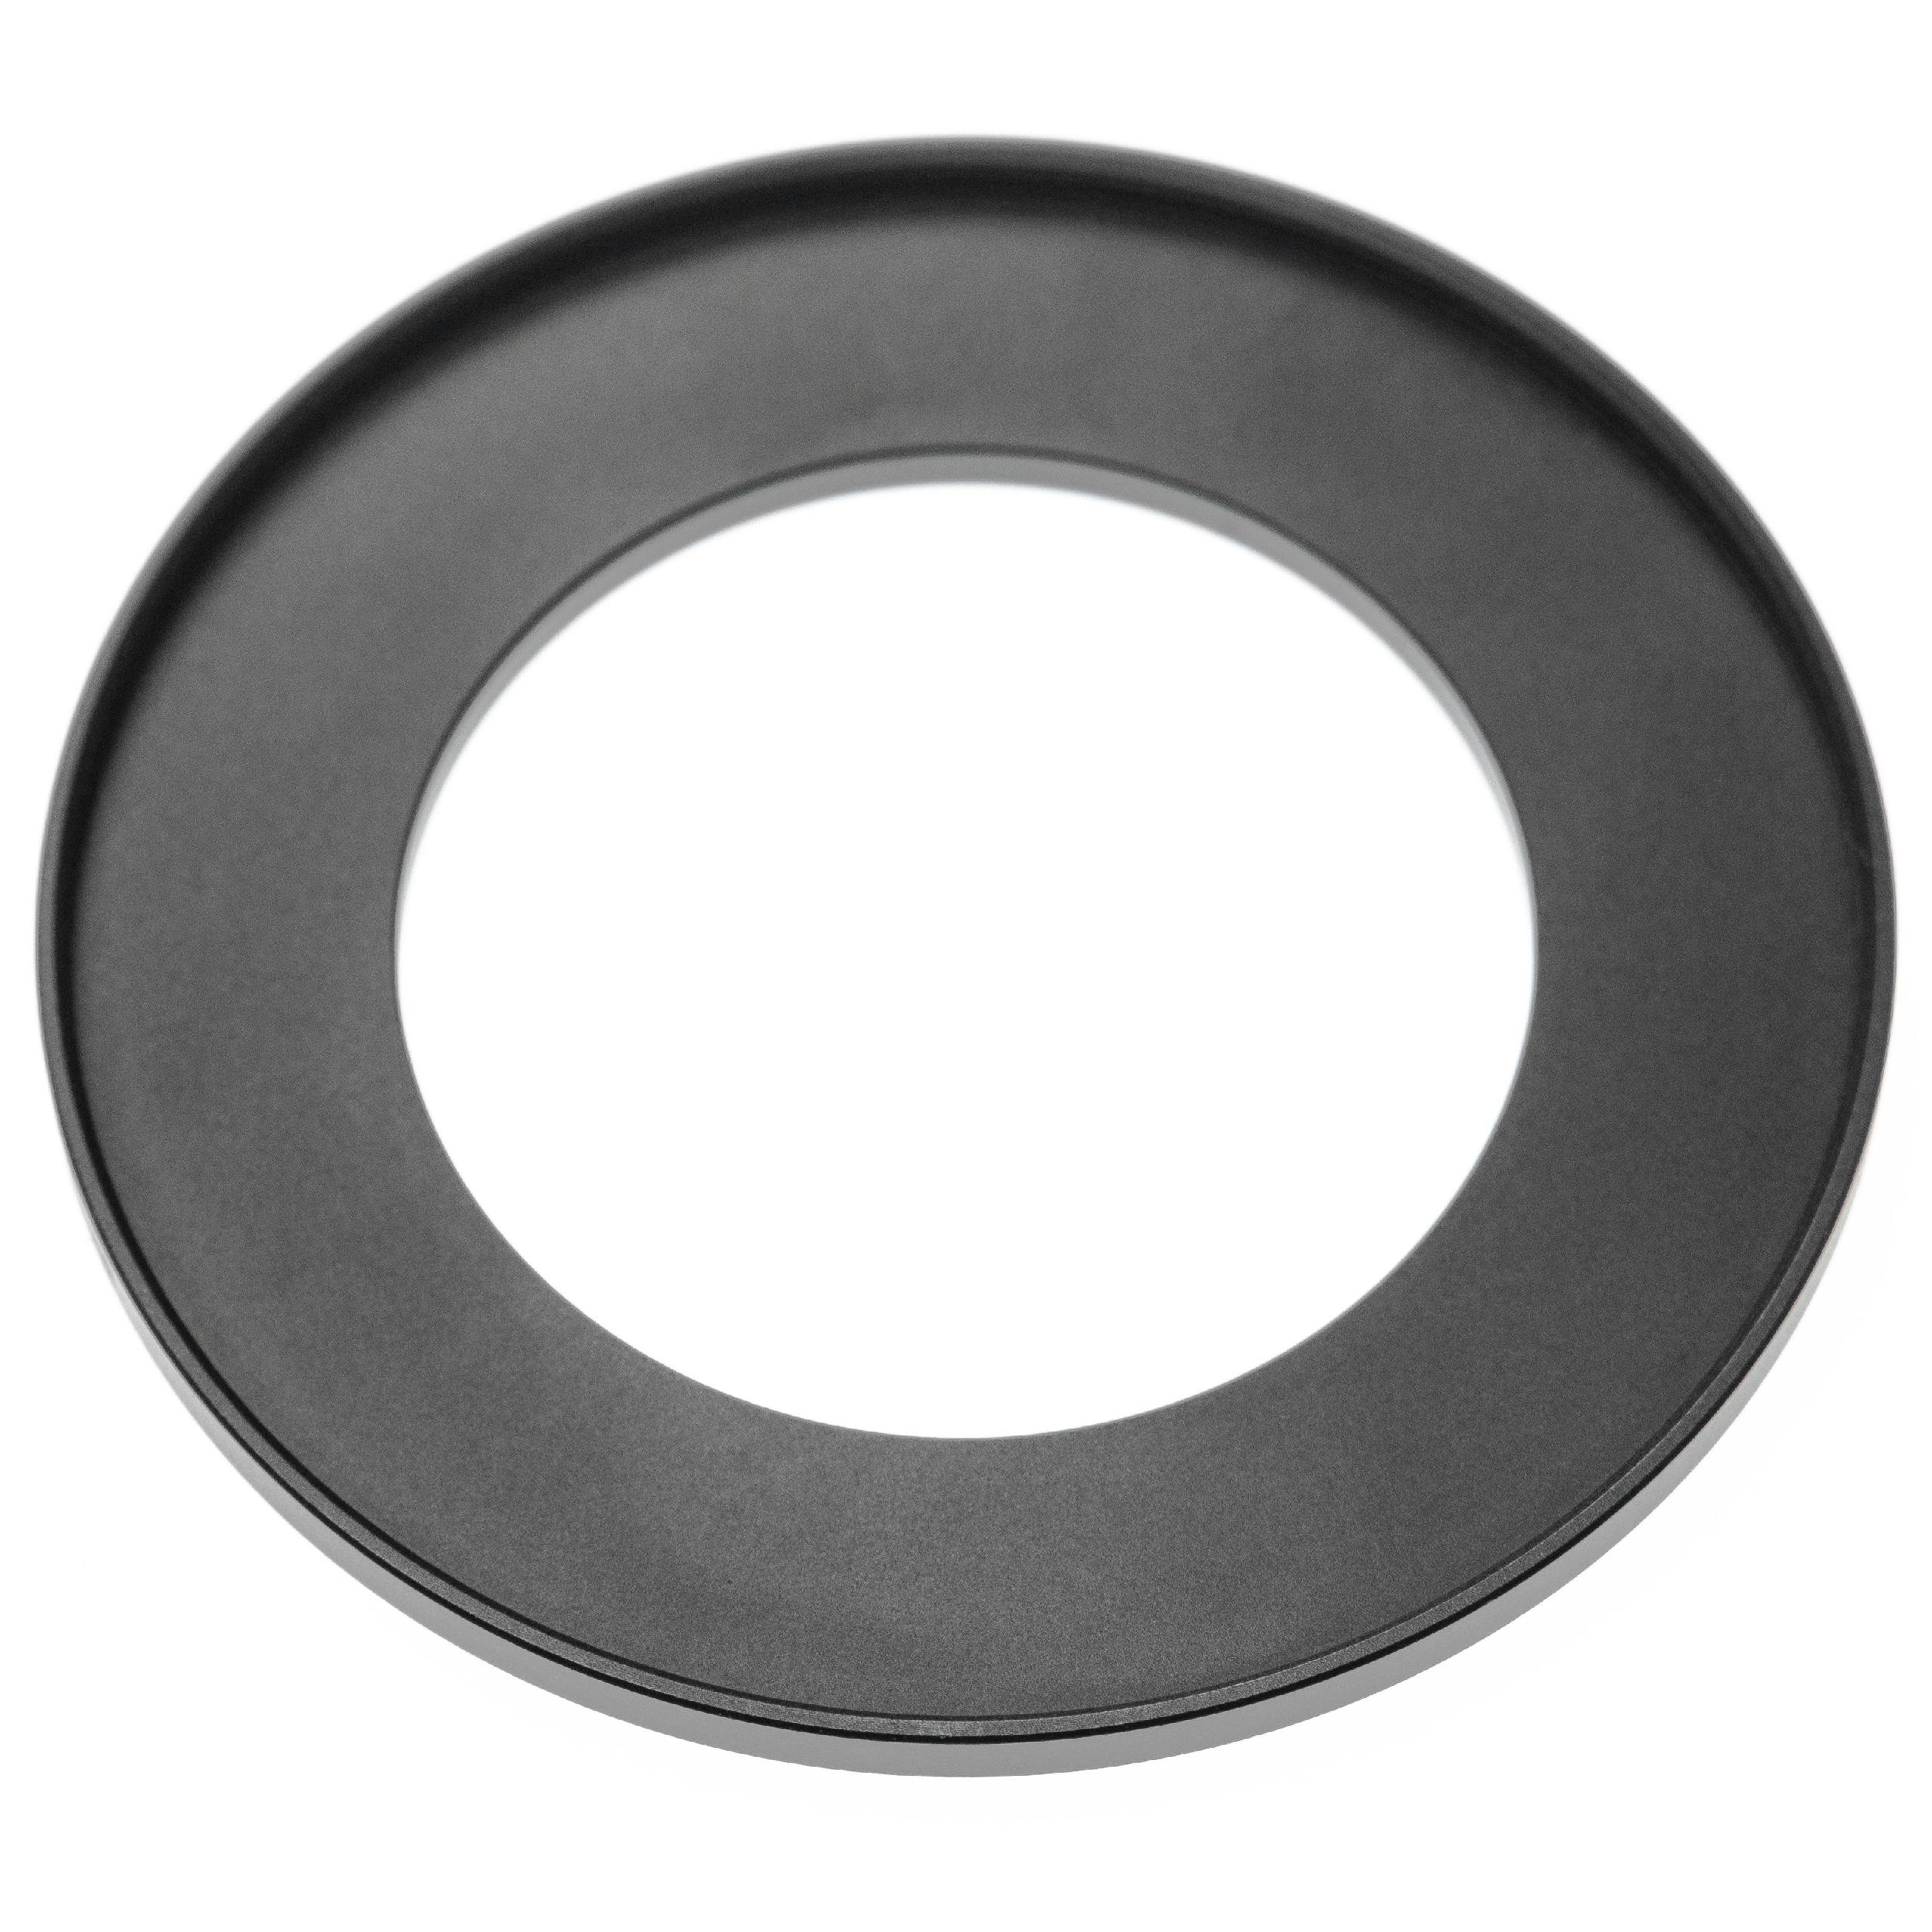 Step-Up Ring Adapter of 62 mm to 95 mmfor various Camera Lens - Filter Adapter